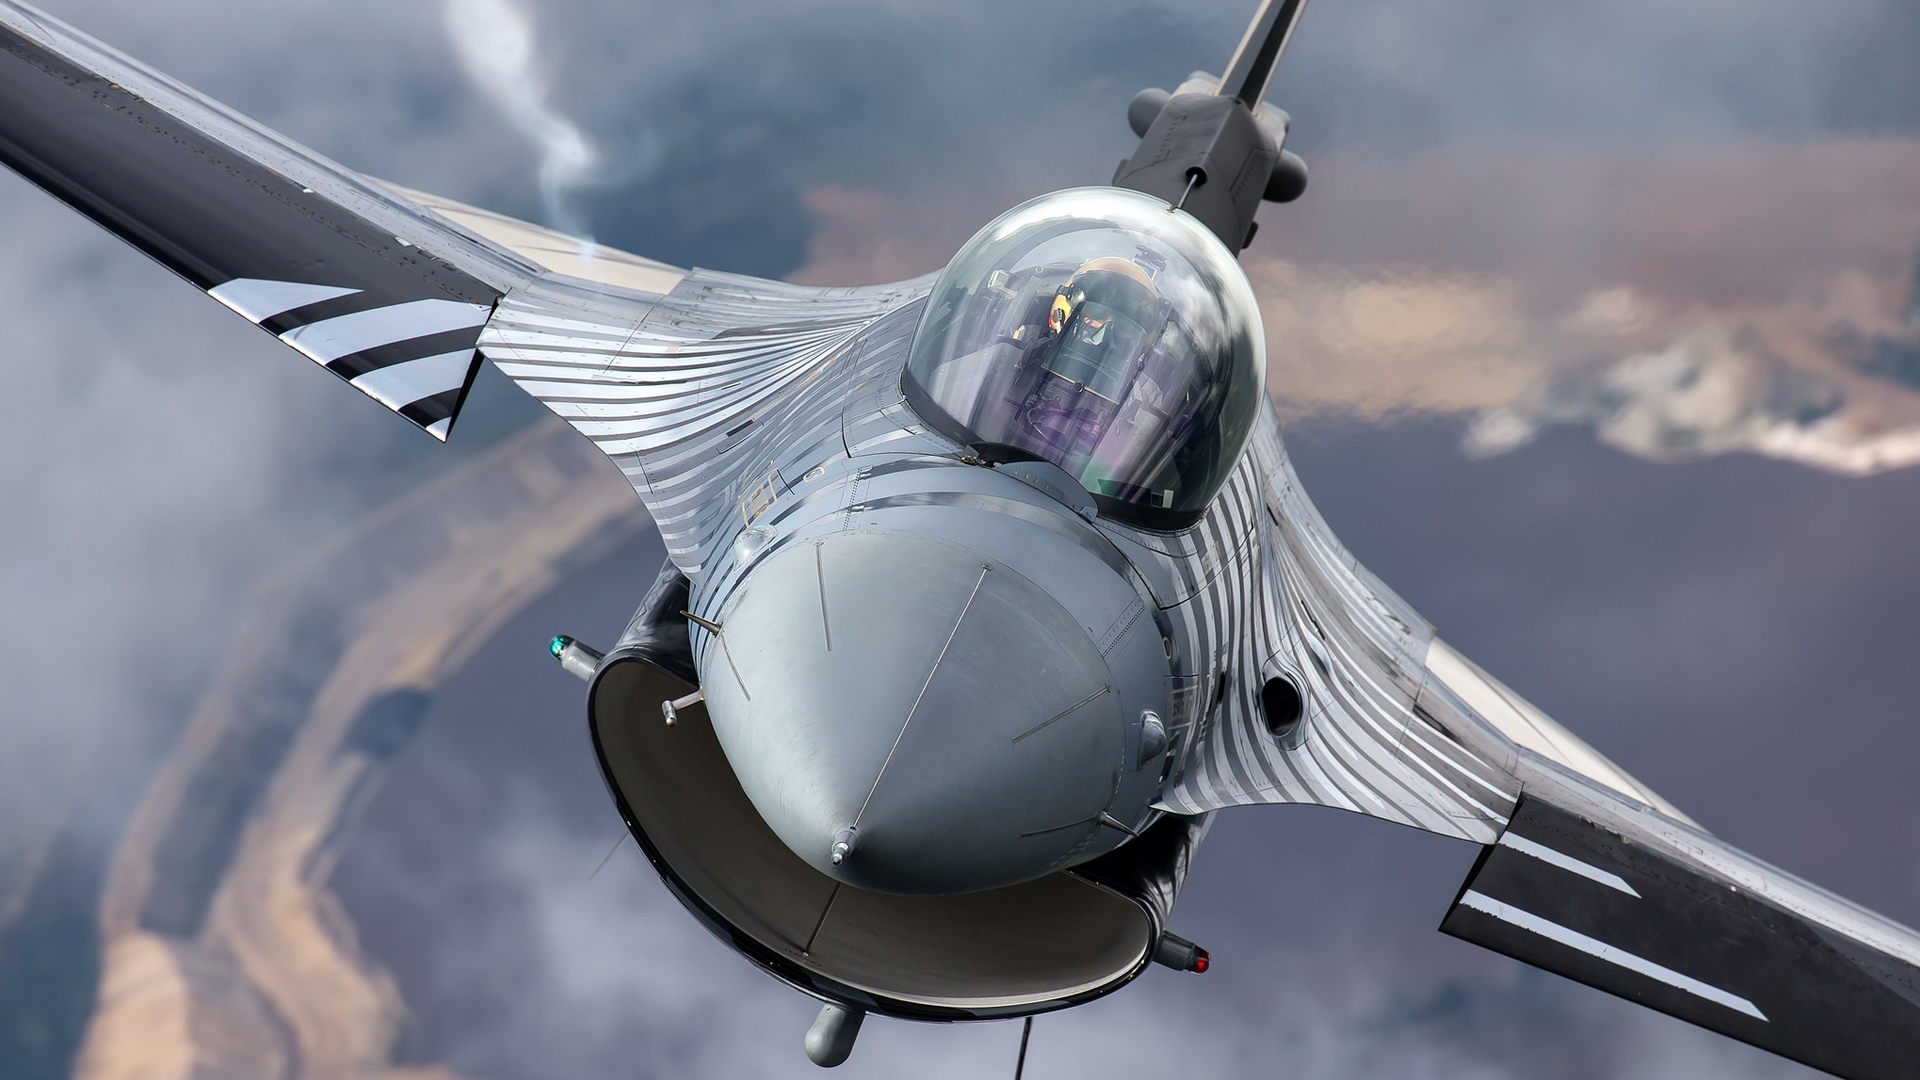 Jet Fighter Military Aircraft Weapon General Dynamics F 16 Fighting Falcon 1920x1080